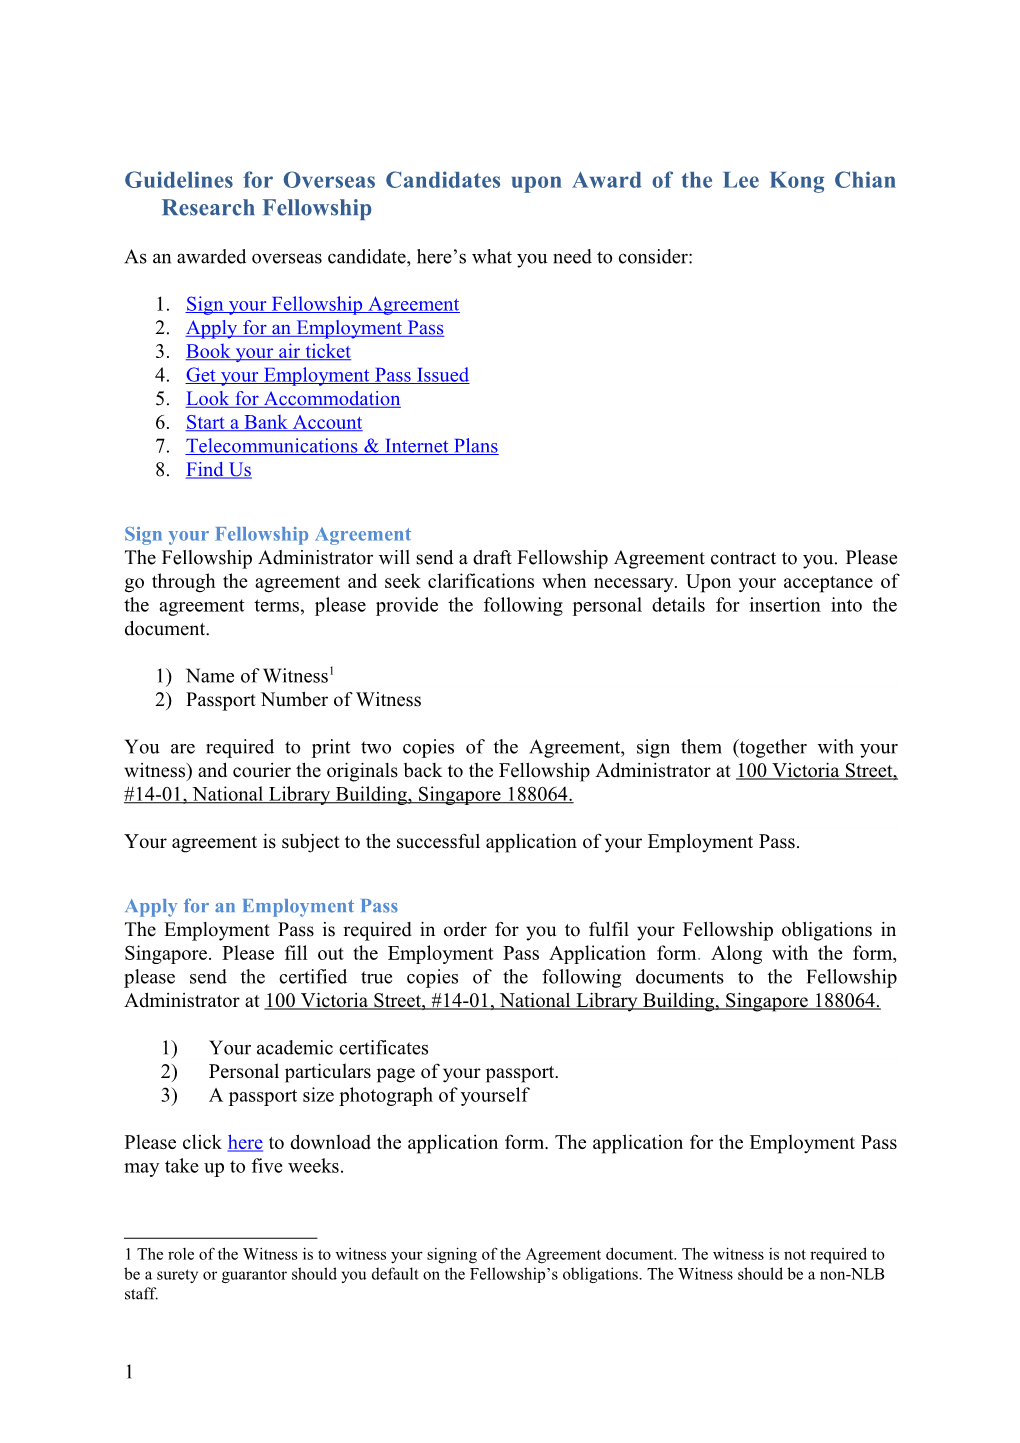 Guidelines for Overseas Candidates Upon Award of the Lee Kong Chian Research Fellowship